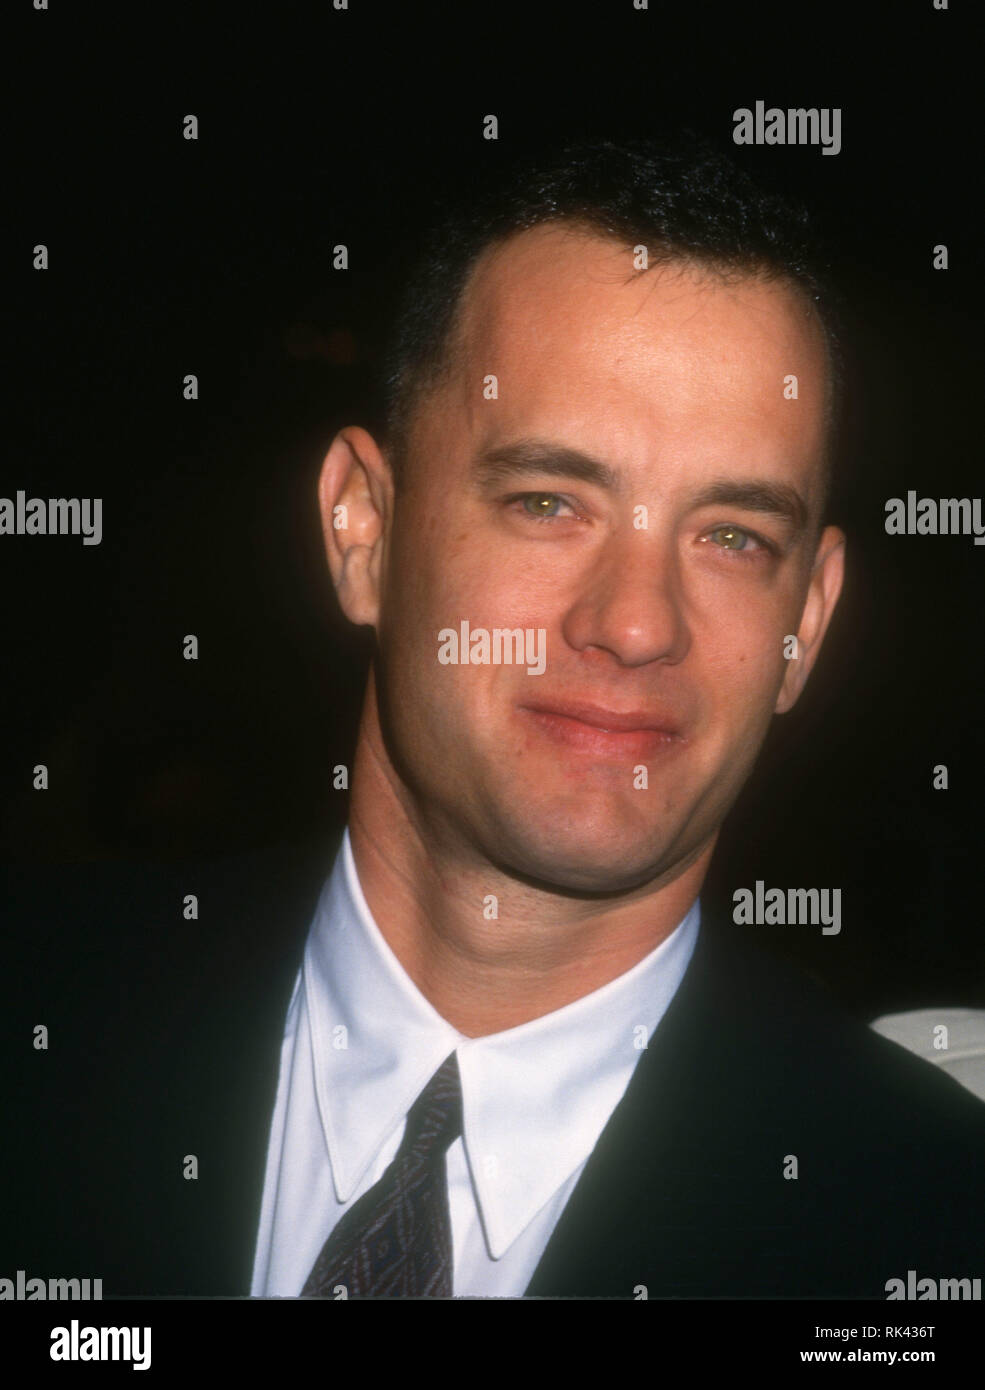 CENTURY CITY, CA - DECEMBER 14: Actor Tom Hanks attends TriStar Pictures' 'Philadelphia' Premiere on December 14, 1993 at Cineplex Odeon Century Plaza Cinemas in Century City, California. Photo by Barry King/Alamy Stock Photo Stock Photo